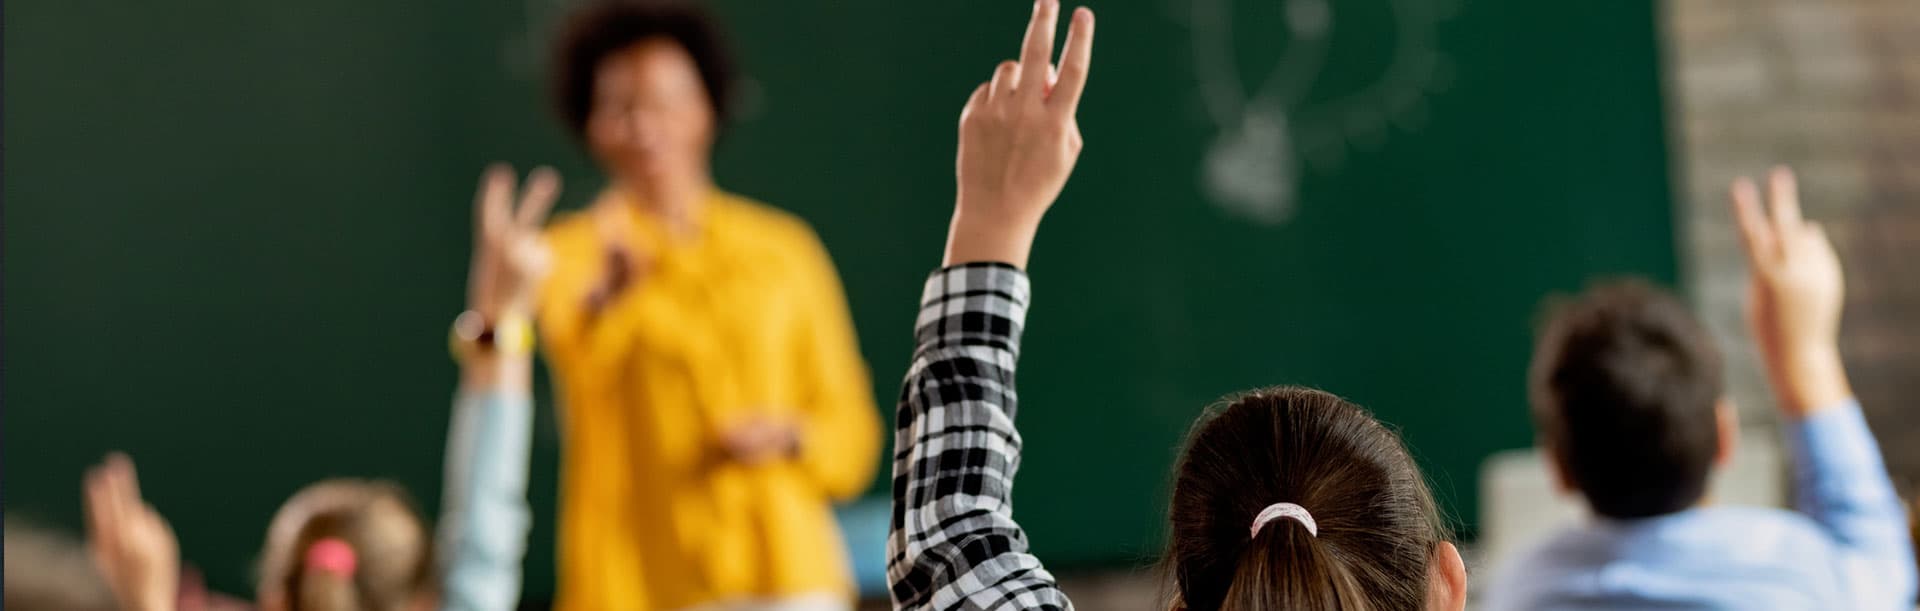 teacher with students raising their hands in classroom